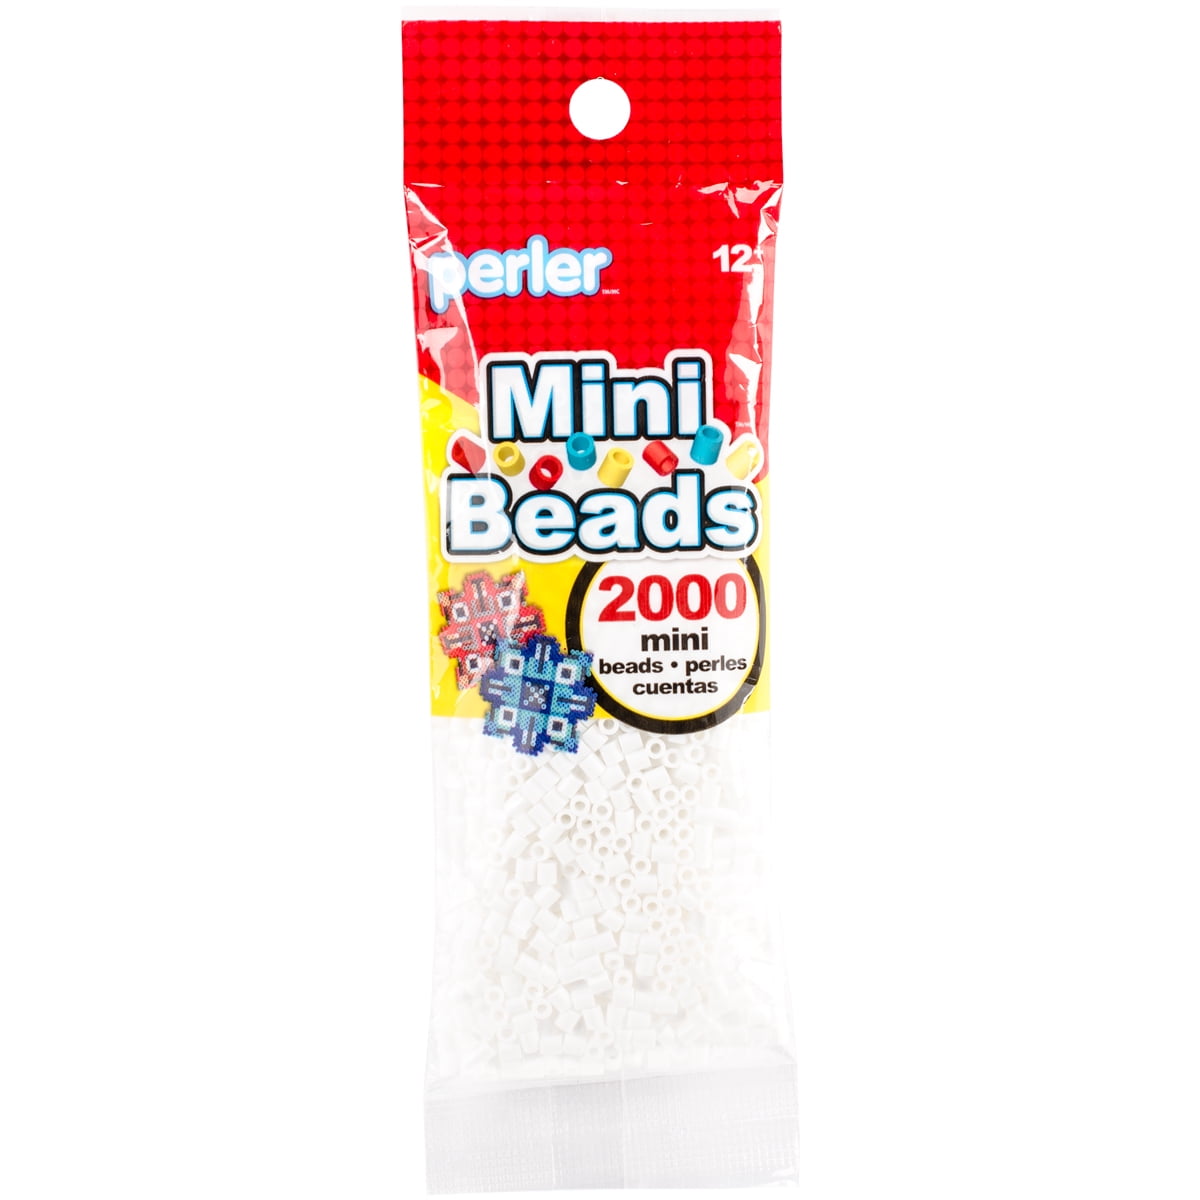 Beados Mega Bead Refill Pack 10 Colors 2000 Beads for sale online